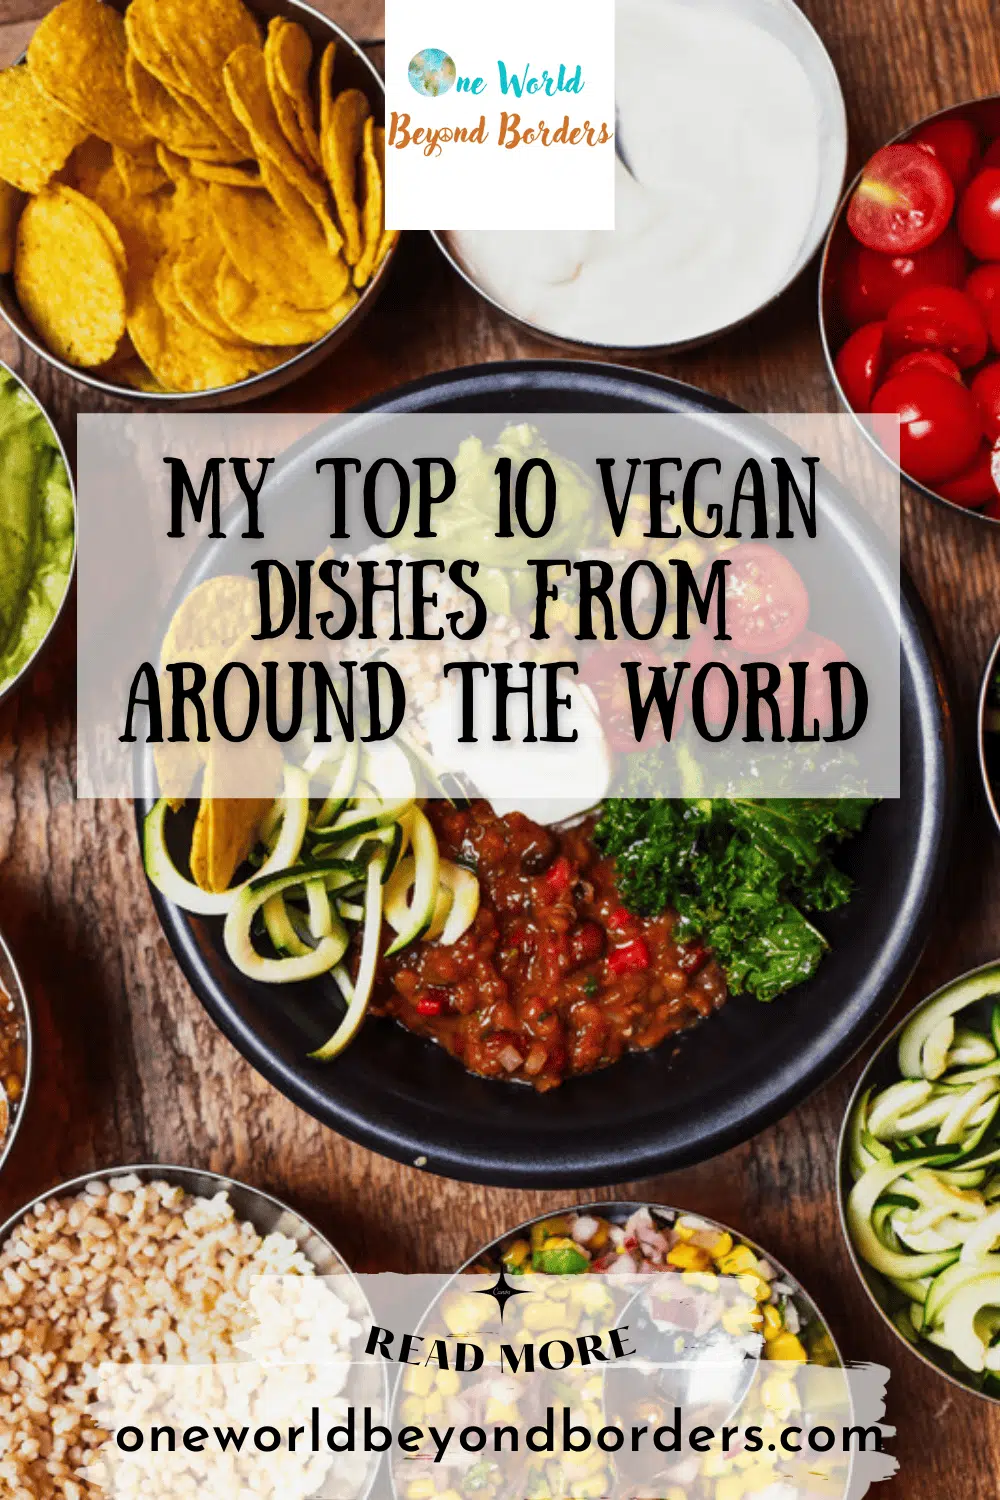 Top 10 vegan dishes from around the world - Pinterest Pin